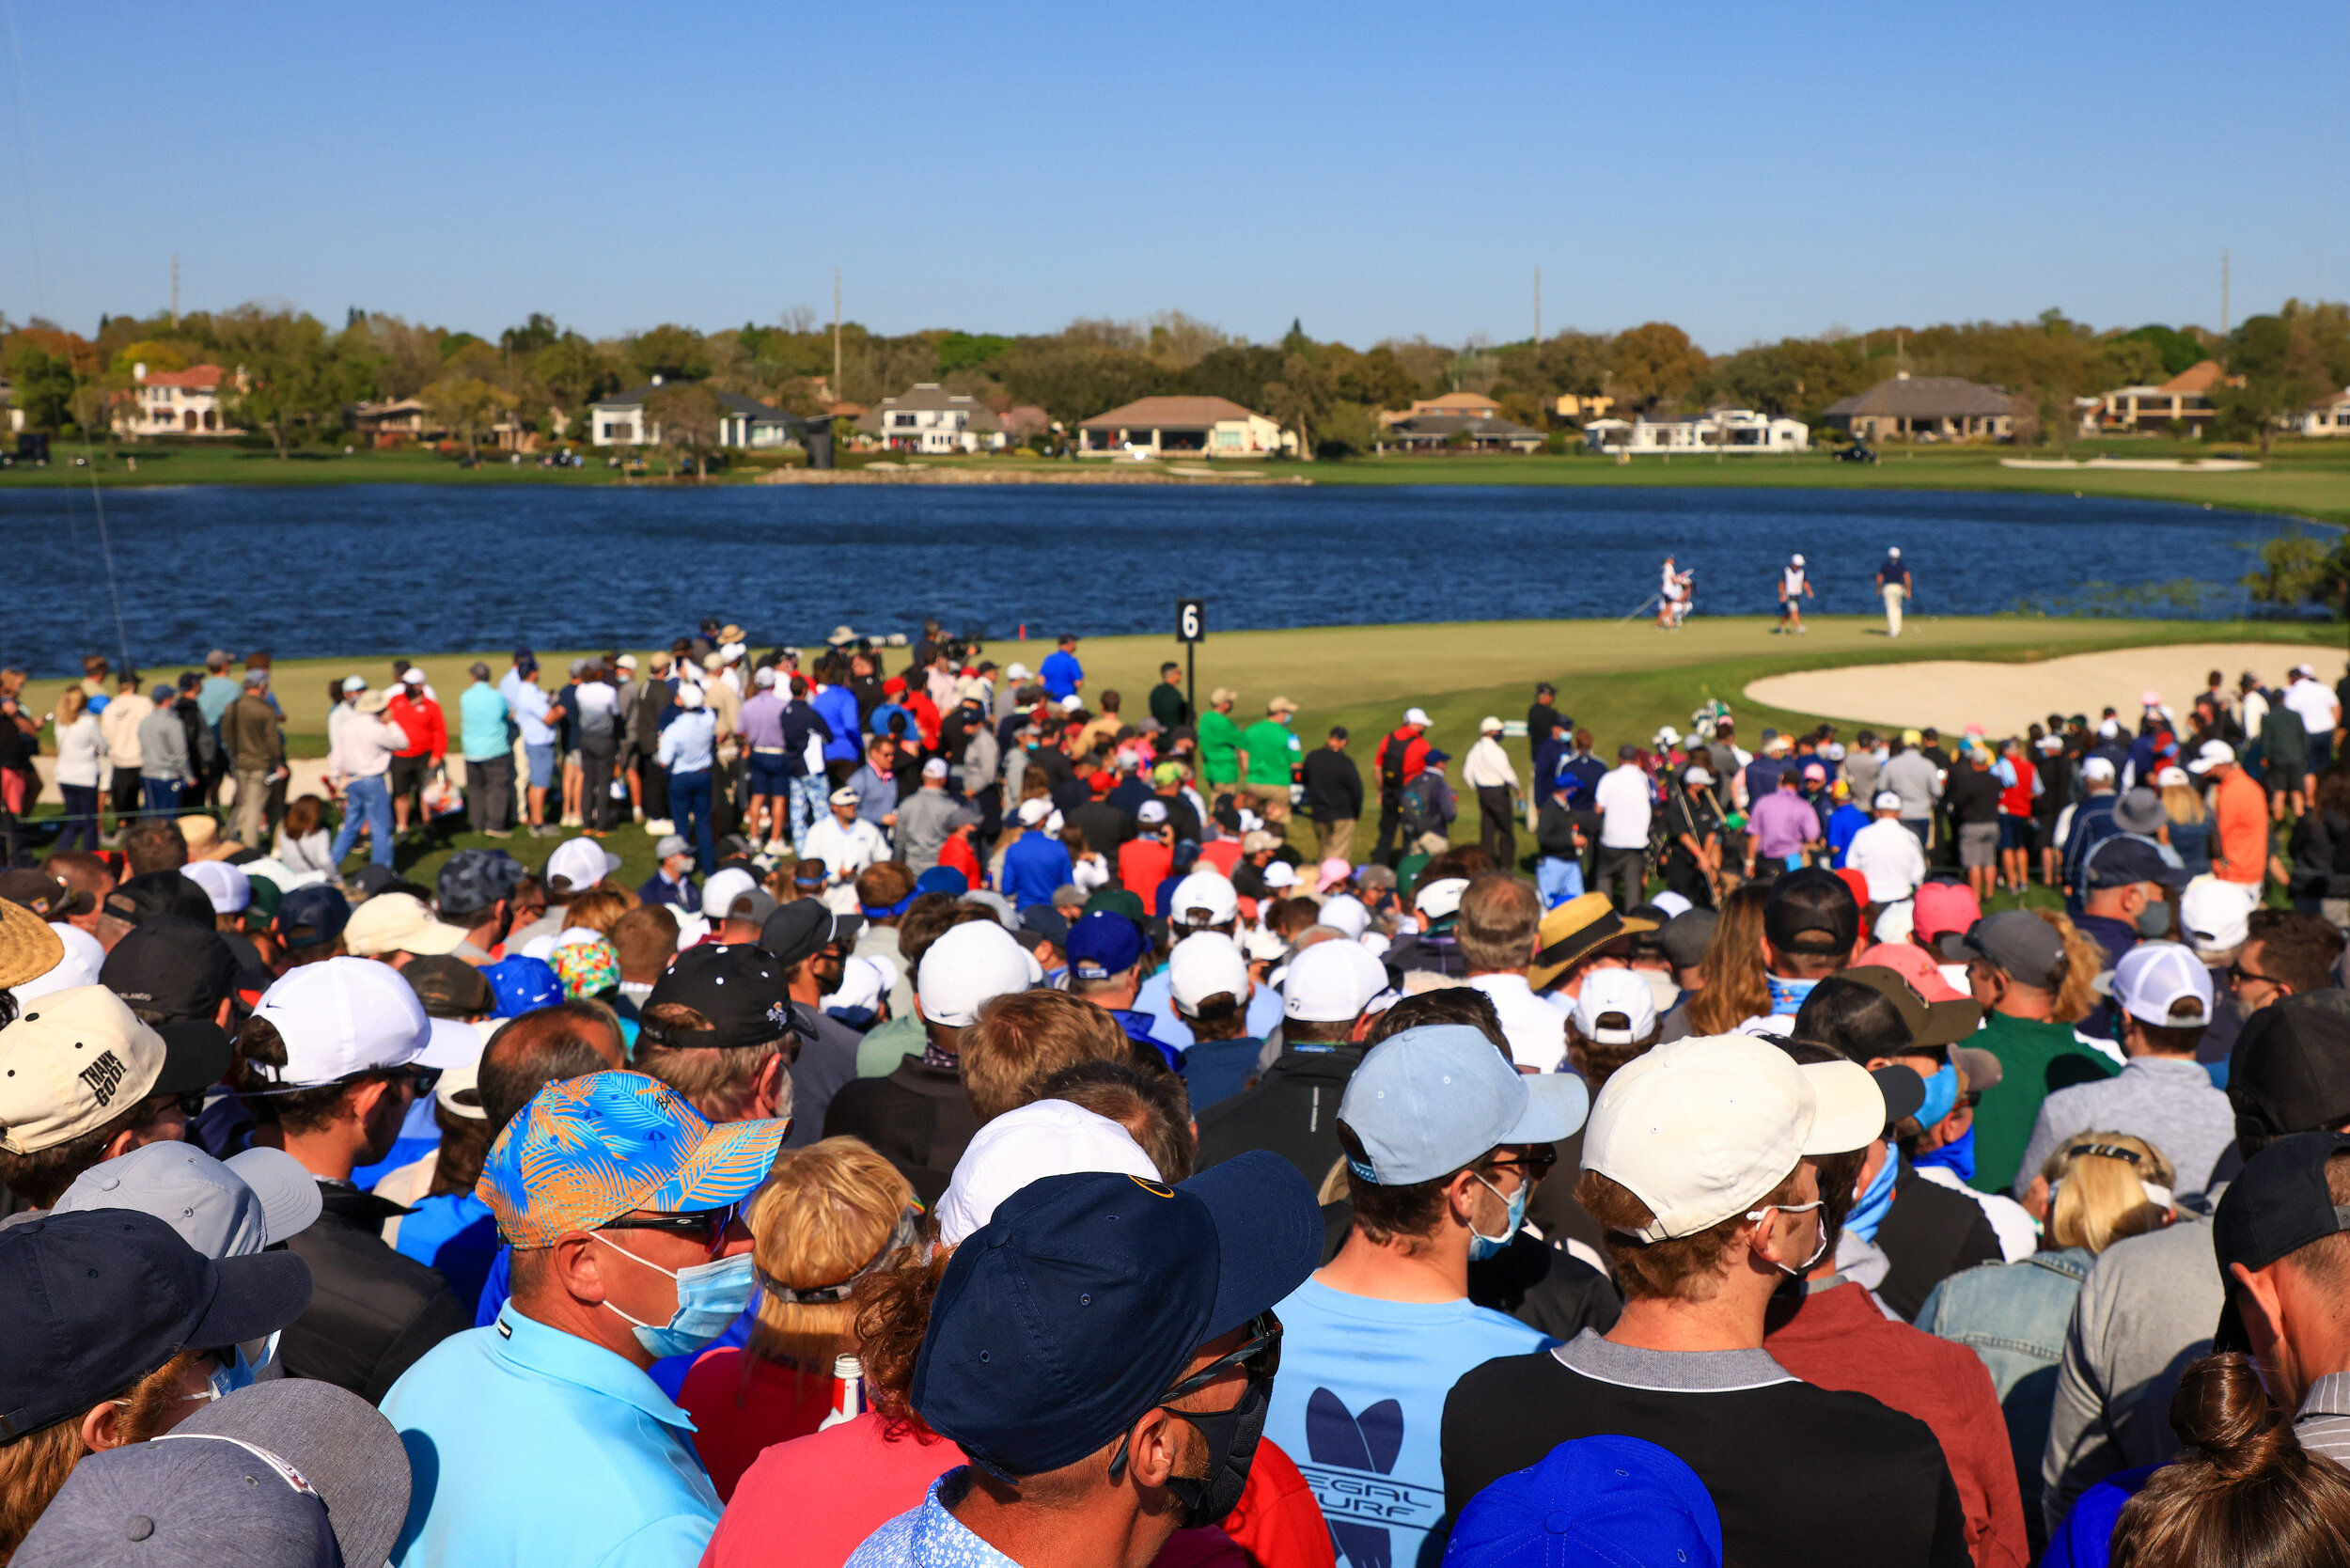  ORLANDO, FLORIDA - MARCH 07: A scenic view is seen as a gallery of fans watch Lee Westwood of England and Bryson DeChambeau of the United States play the sixth green during the final round of the Arnold Palmer Invitational Presented by MasterCard at